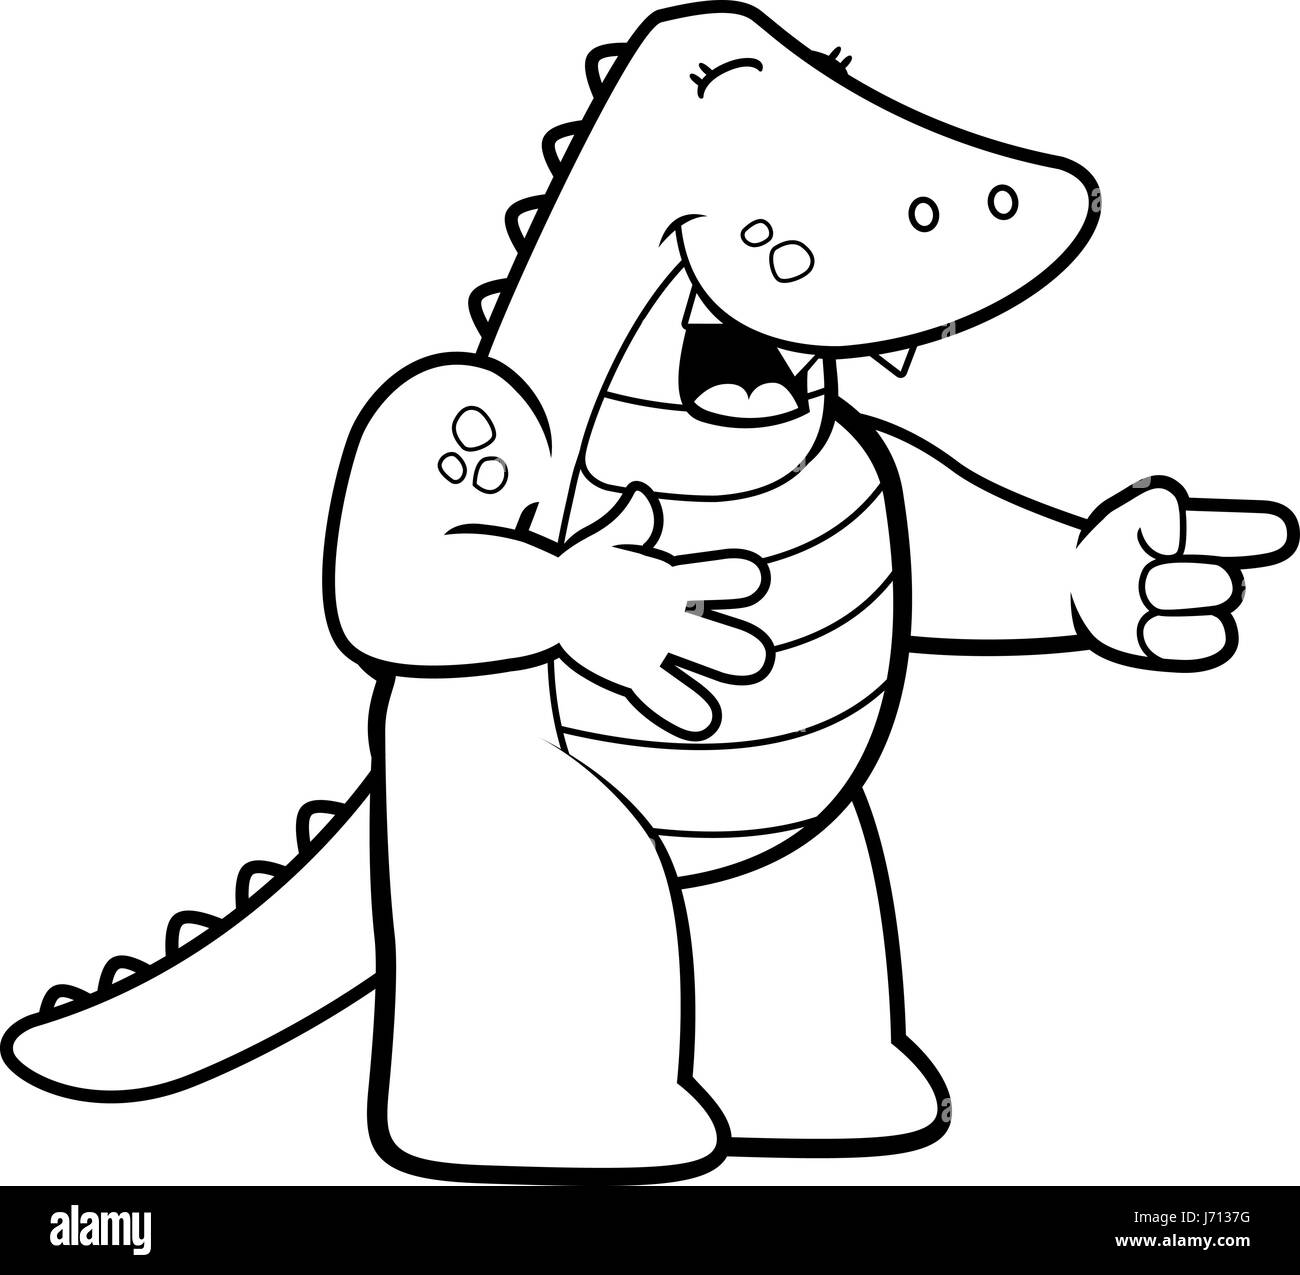 A happy cartoon alligator pointing and laughing. Stock Vector